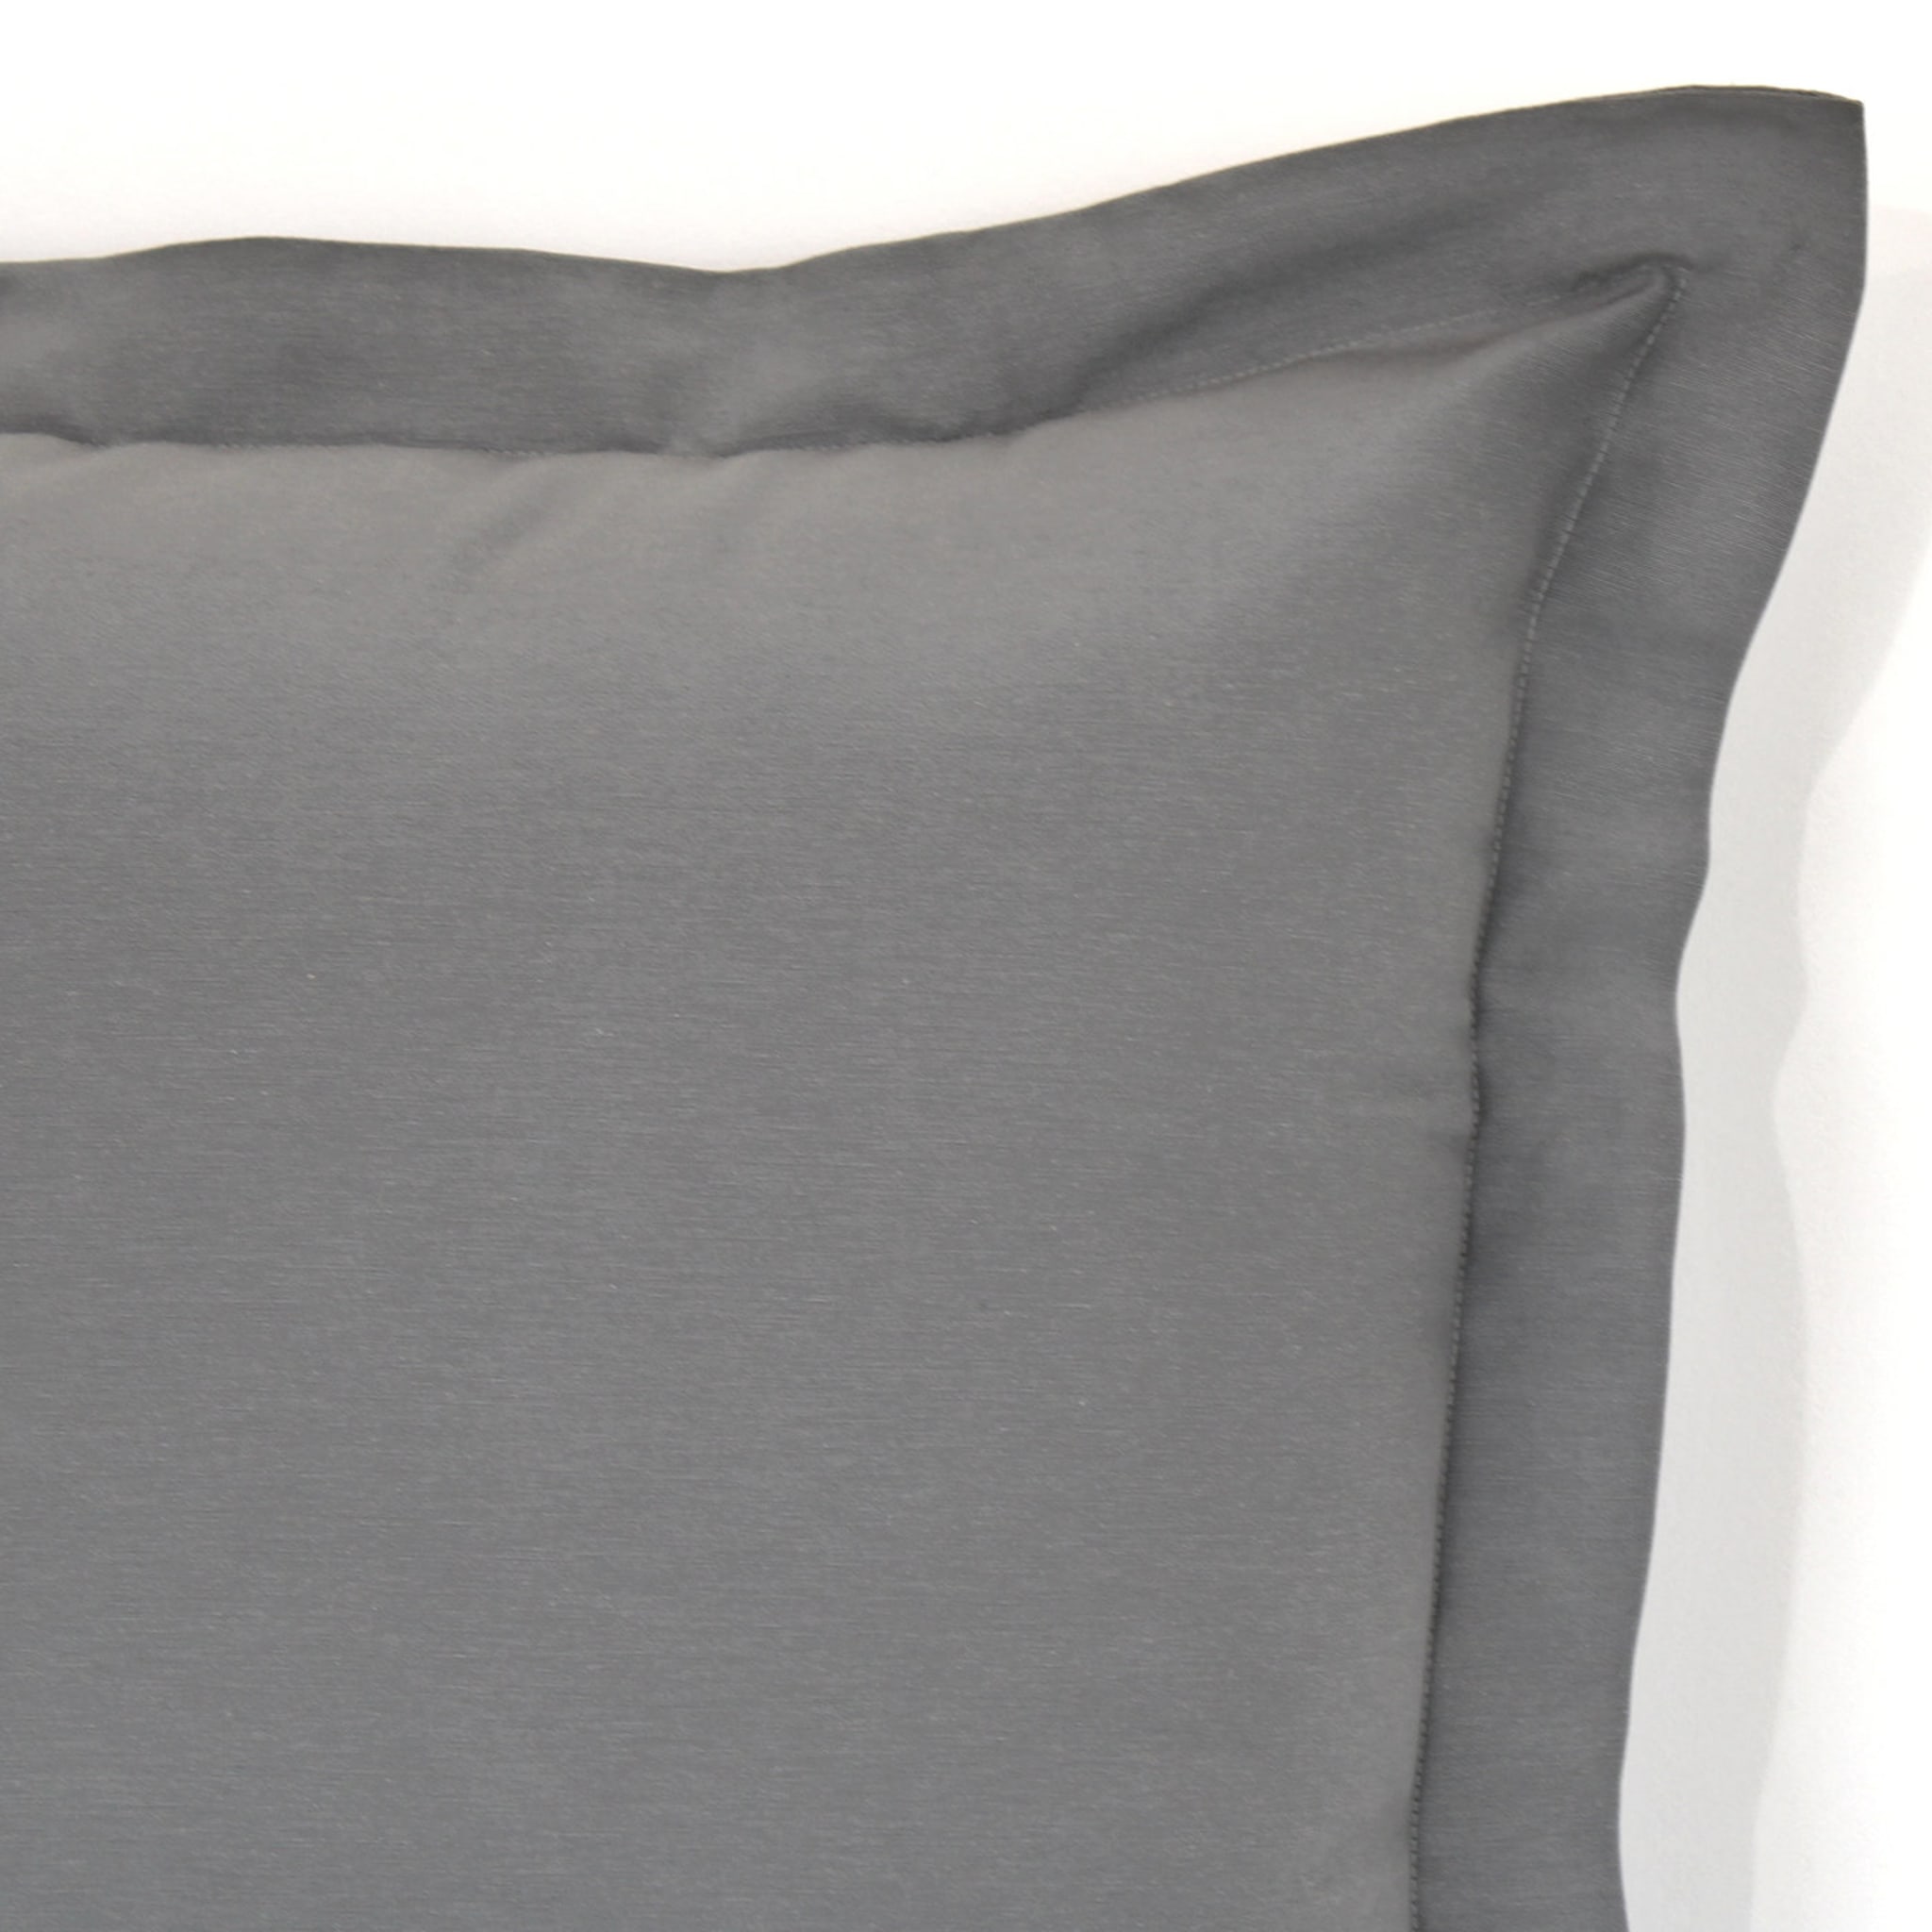 Set of 2 Large Gray Cushions - Alternative view 1